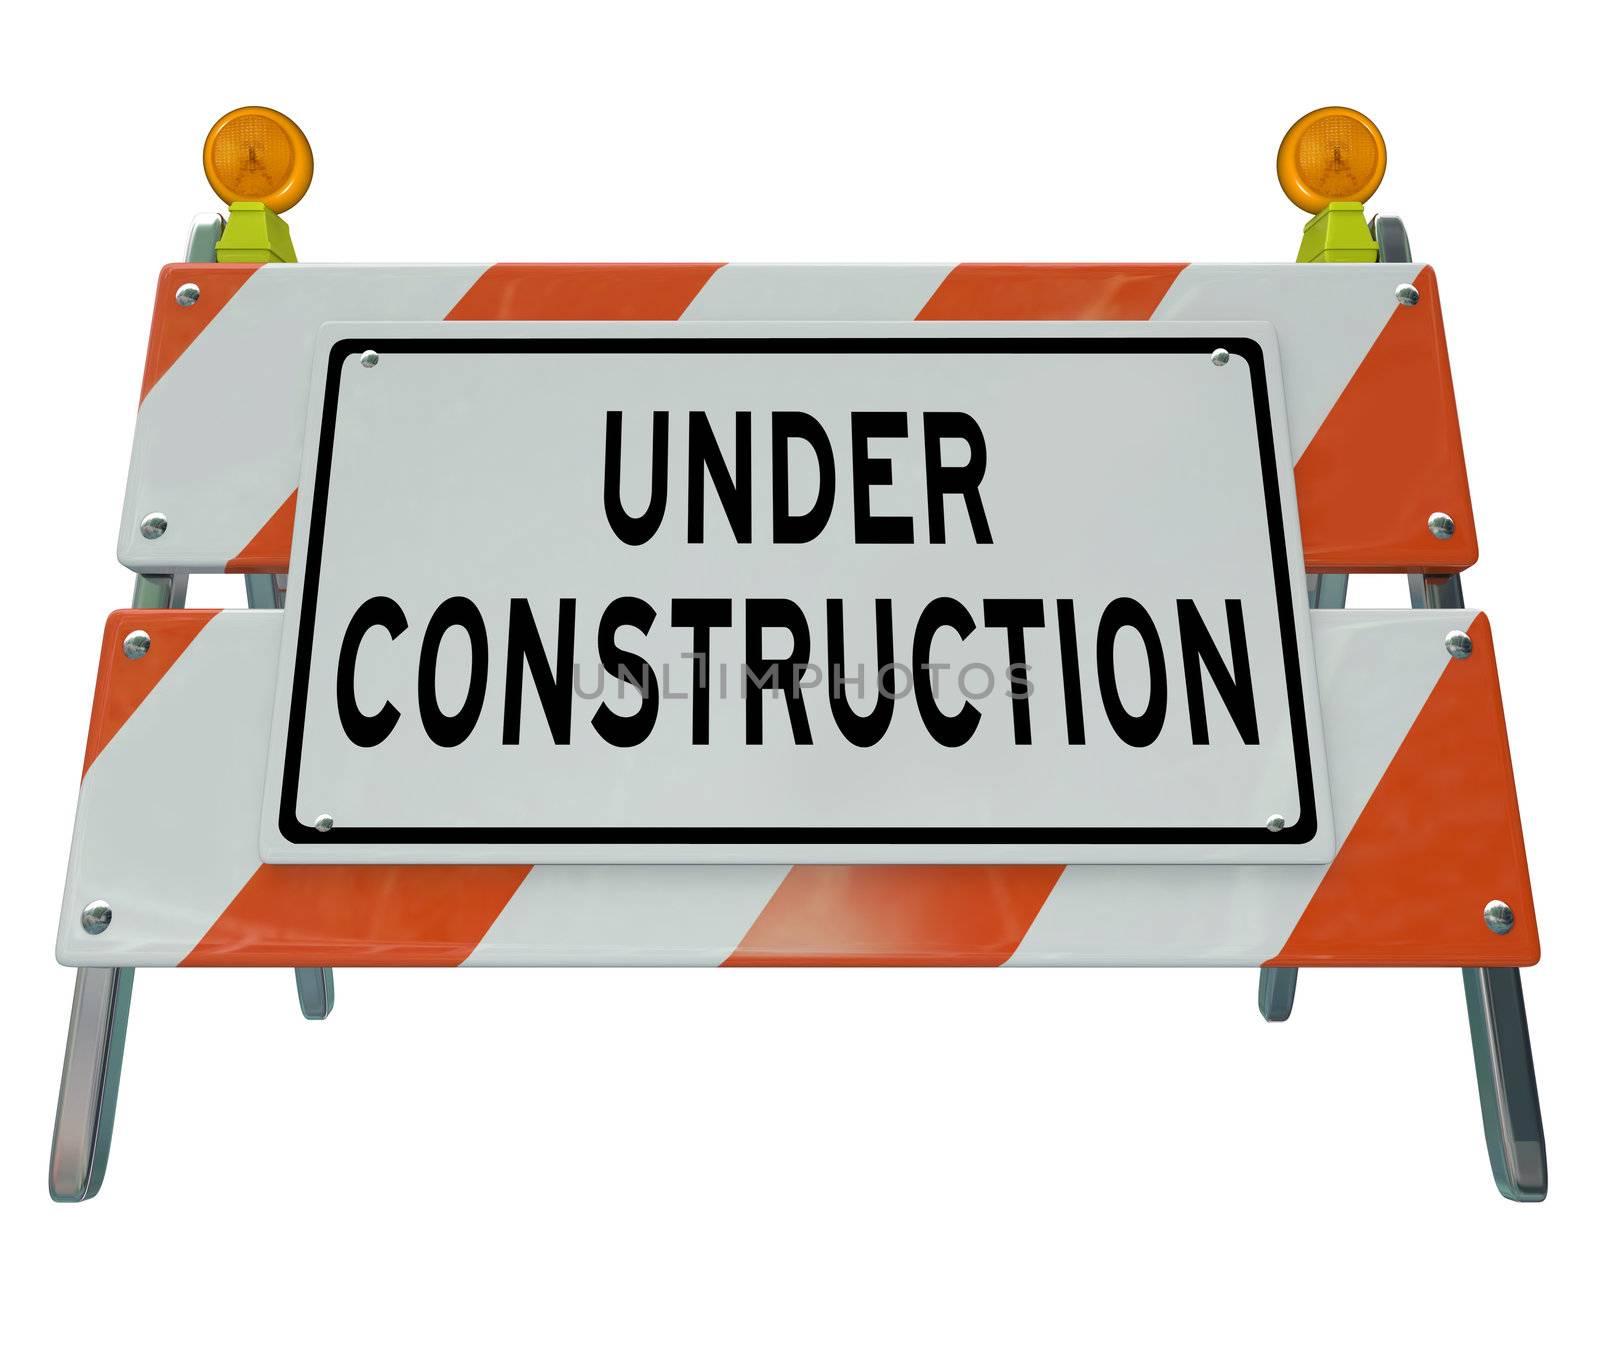 Under Construction - Road Barricade Improvement Project by iQoncept